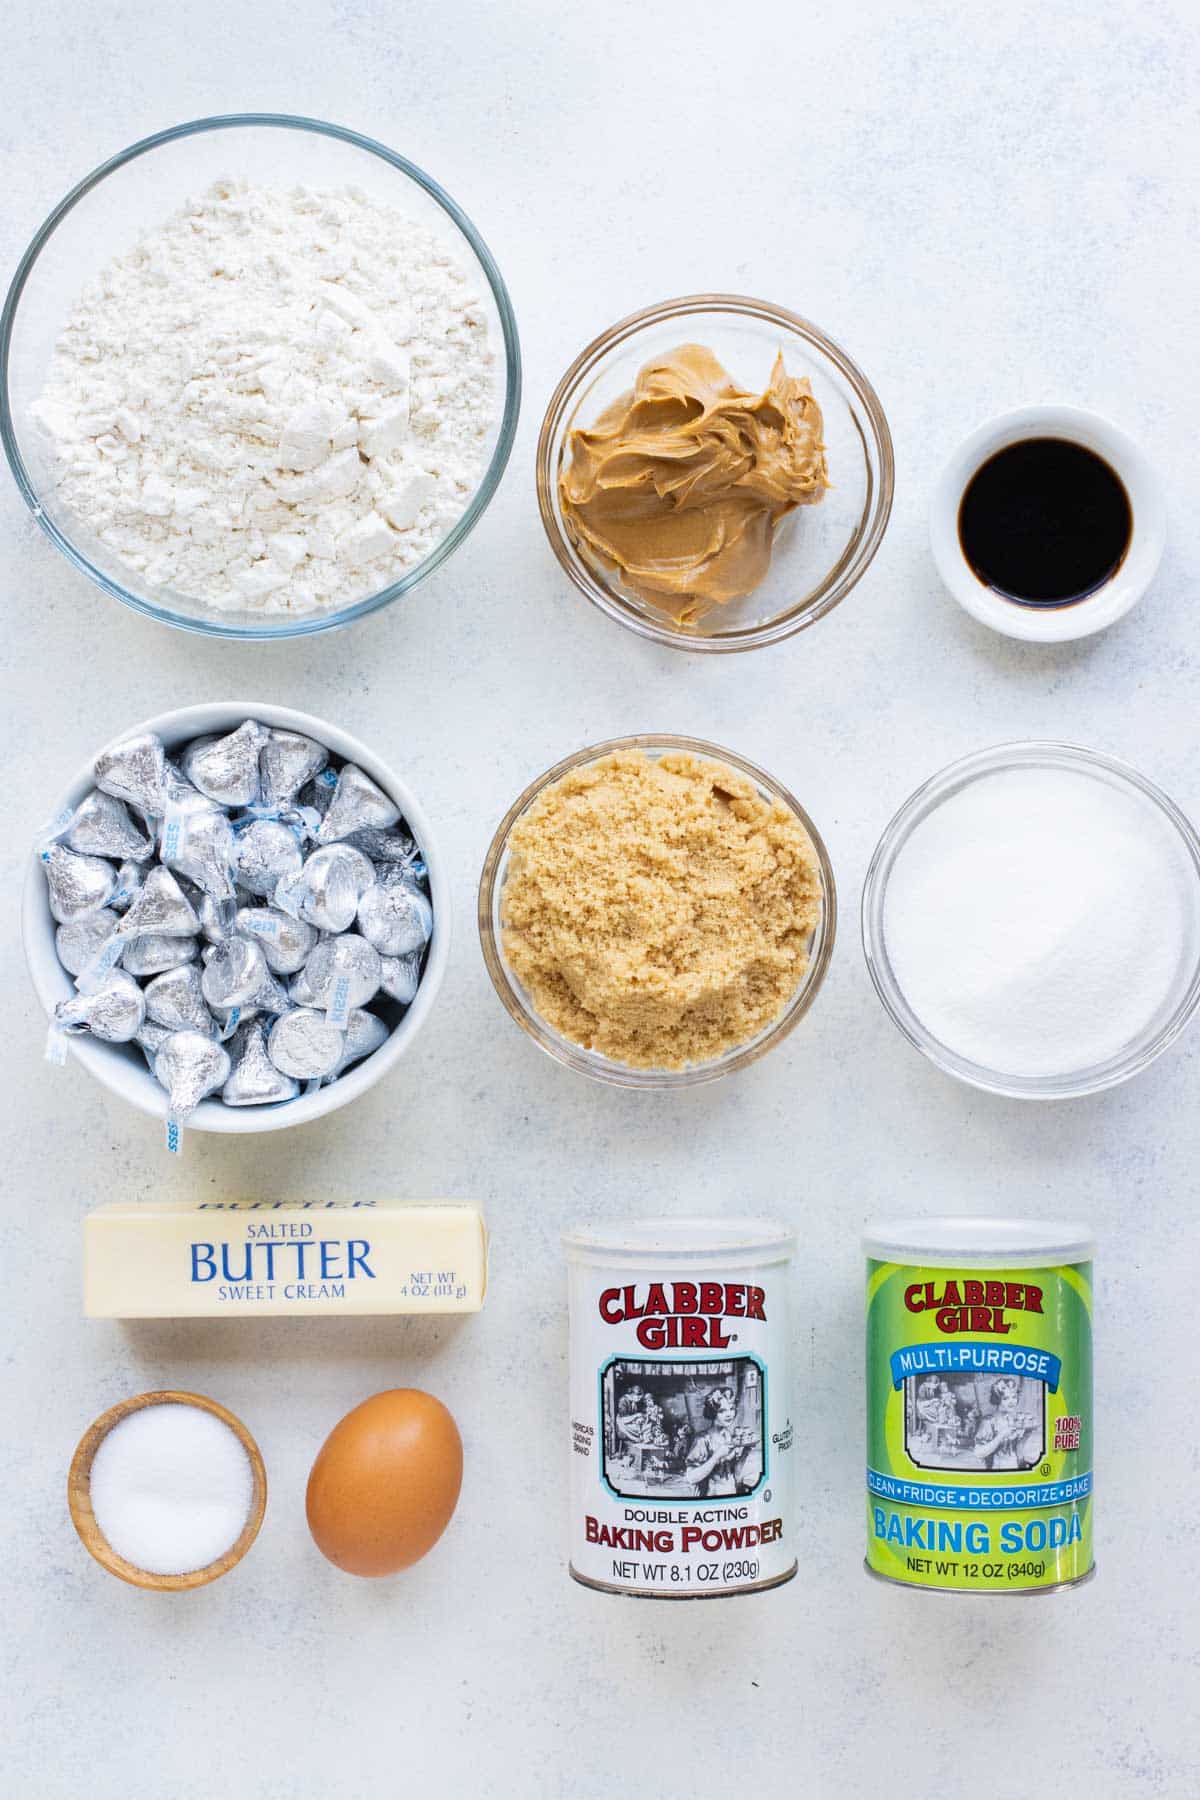 Flour, peanut butter, eggs, sugars, and kisses are the ingredients for these cookies.